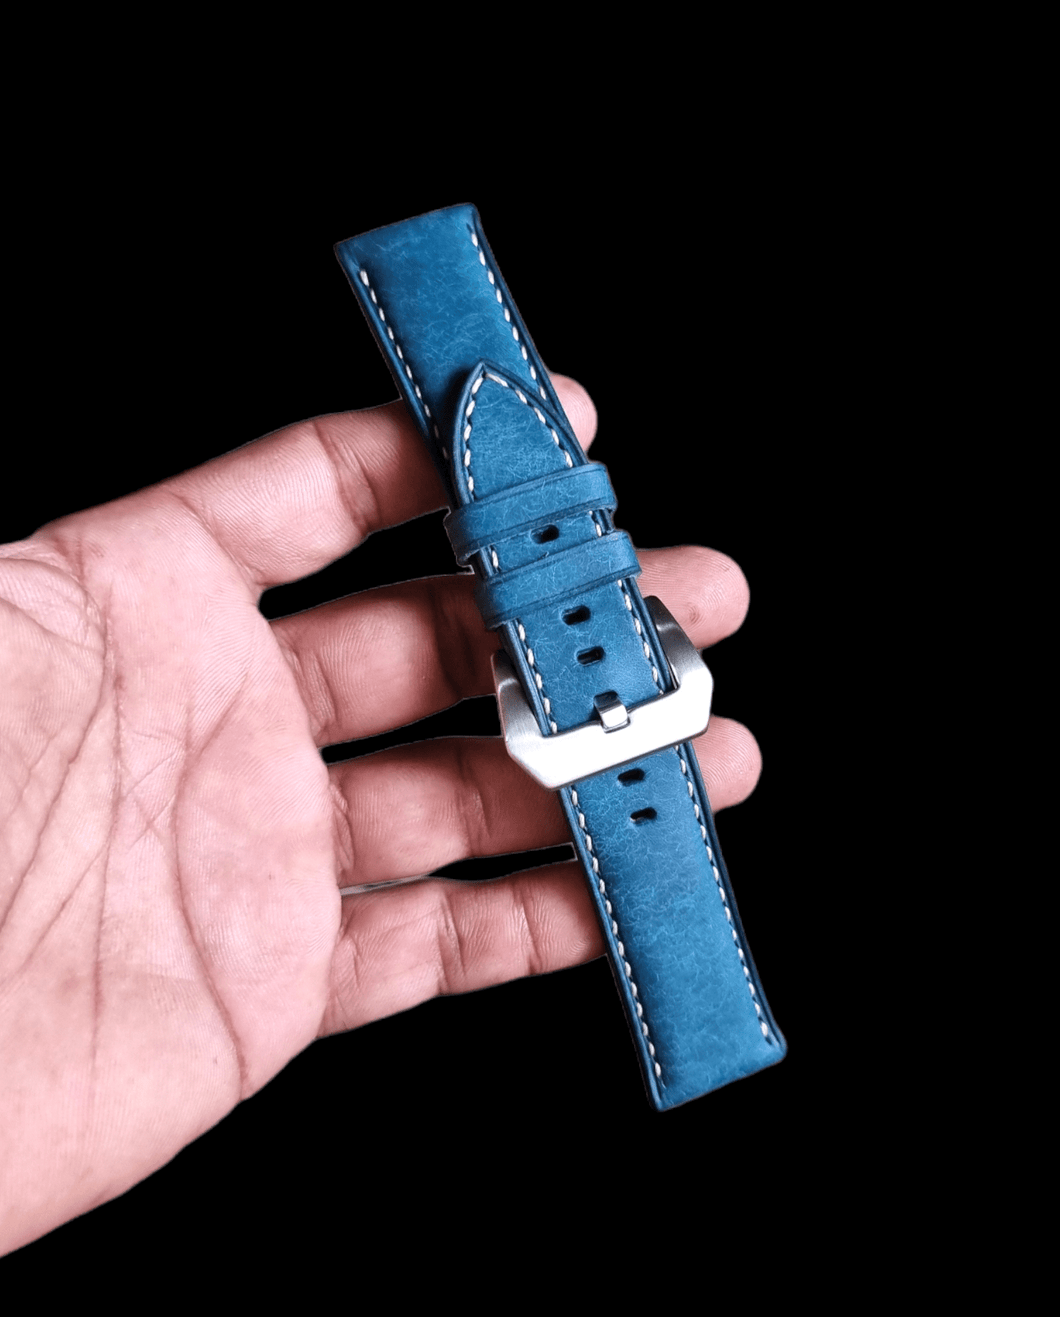 Indianleathercraft Watch Bands 22mm / Ocean blue Italian leather straps for panerai